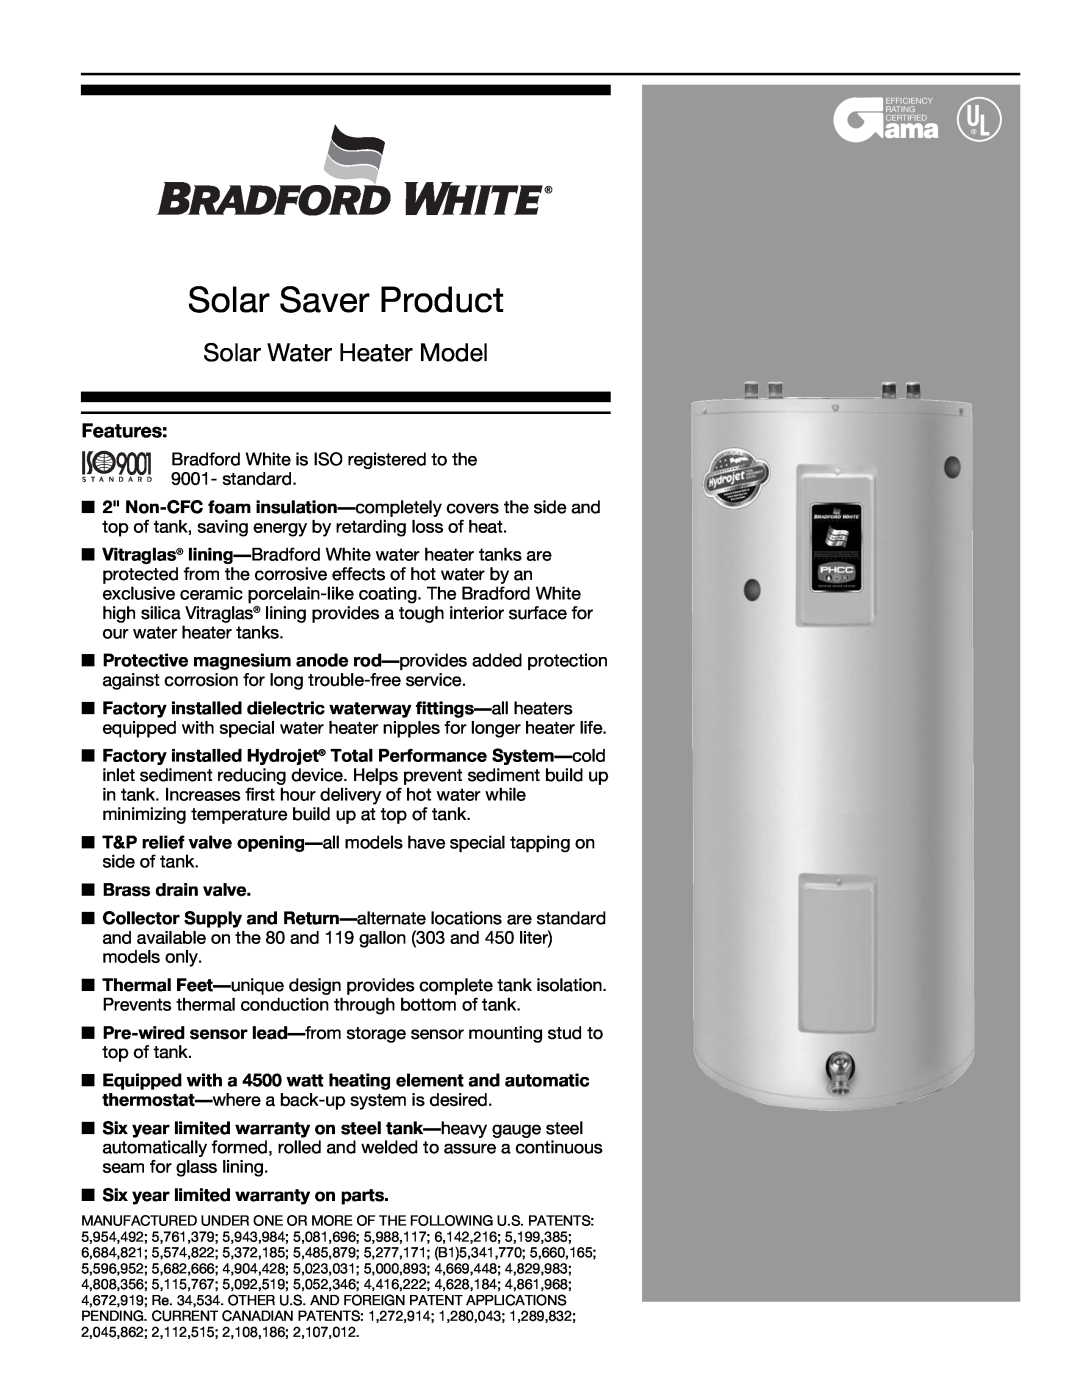 Bradford-White Corp 500-B warranty Solar Saver Product, Solar Water Heater Model, Features 